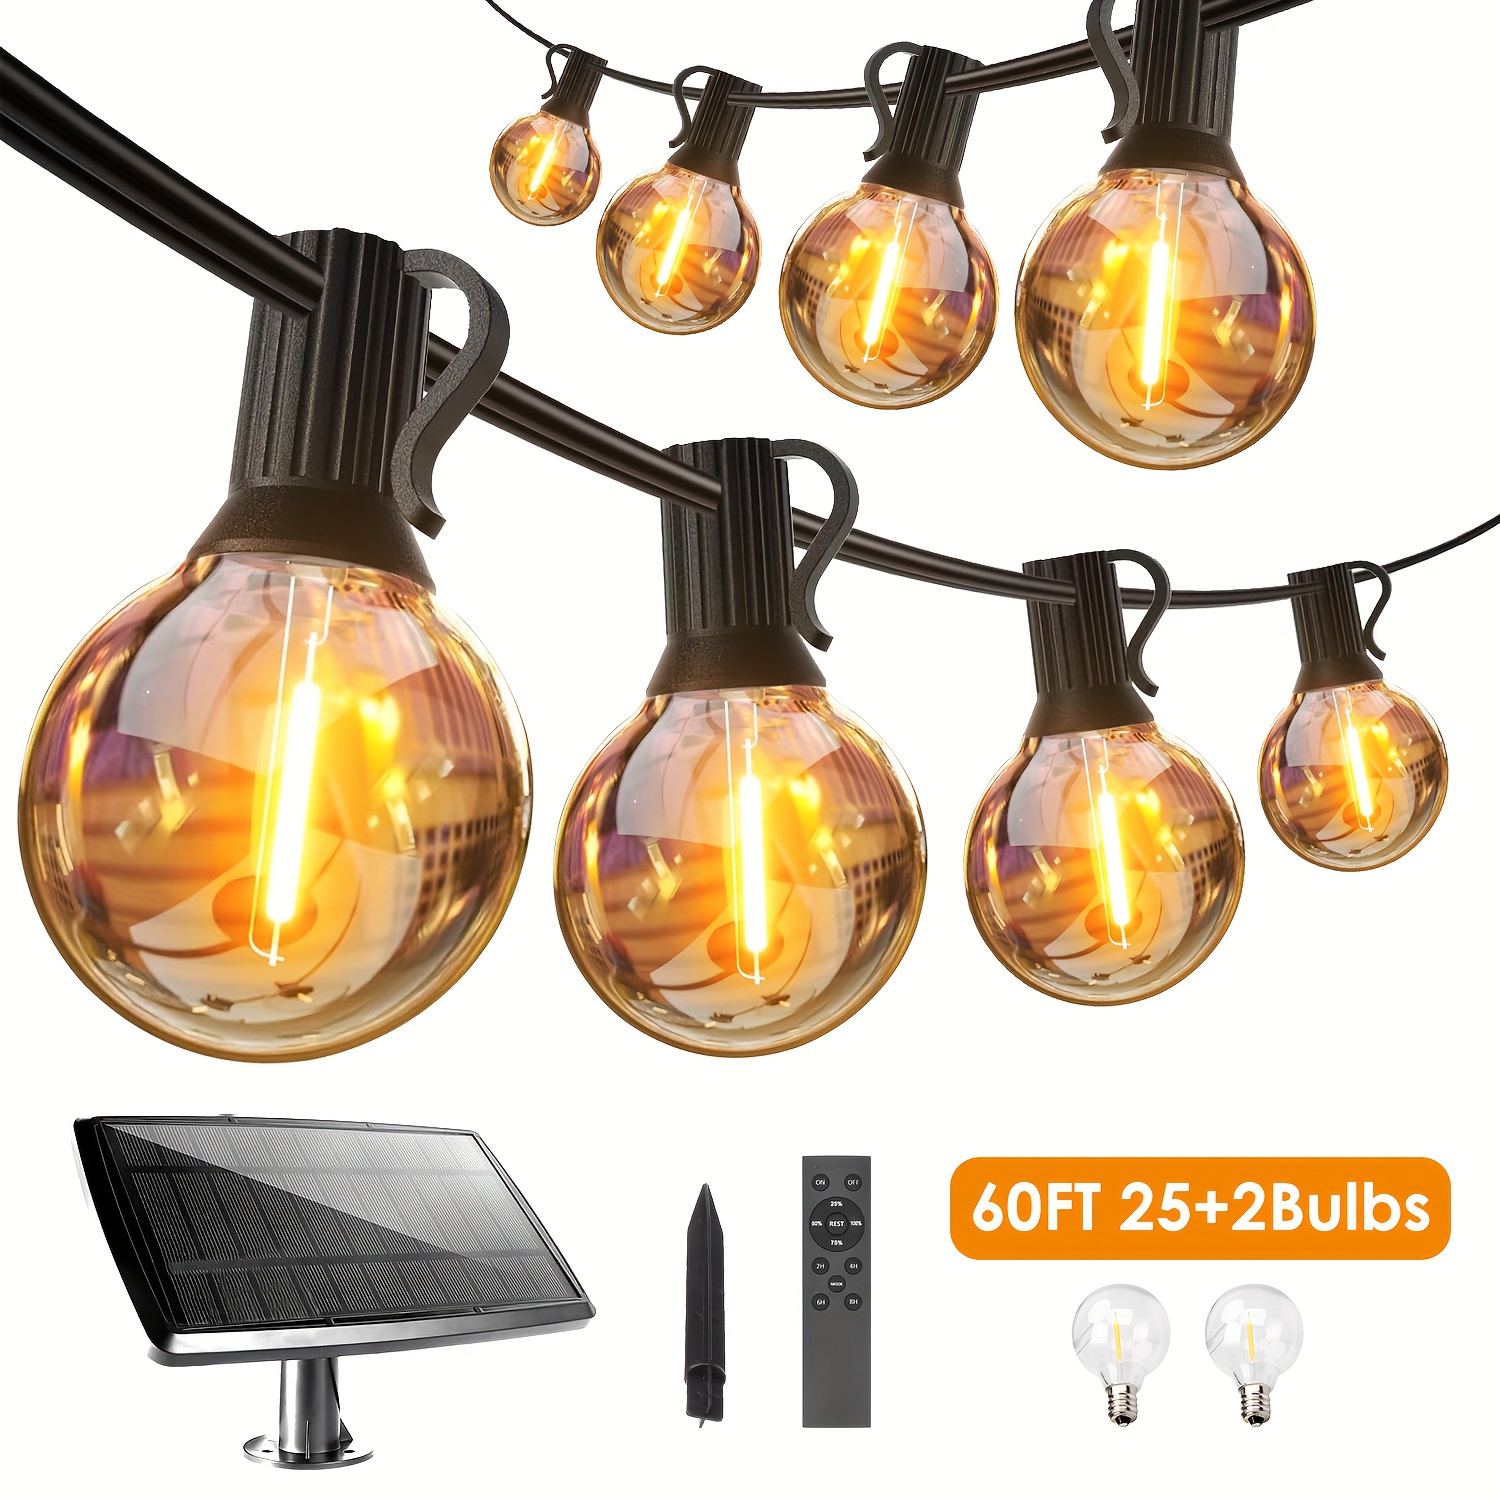 

1pc/2pc Solar Outdoor String Lights With Remote, 60ft/120ft G40 Globe Patio Lights With 25 Edison Bulbs (2 Spare) Hanging Lights For Backyard Porch Balcony Decor, Black